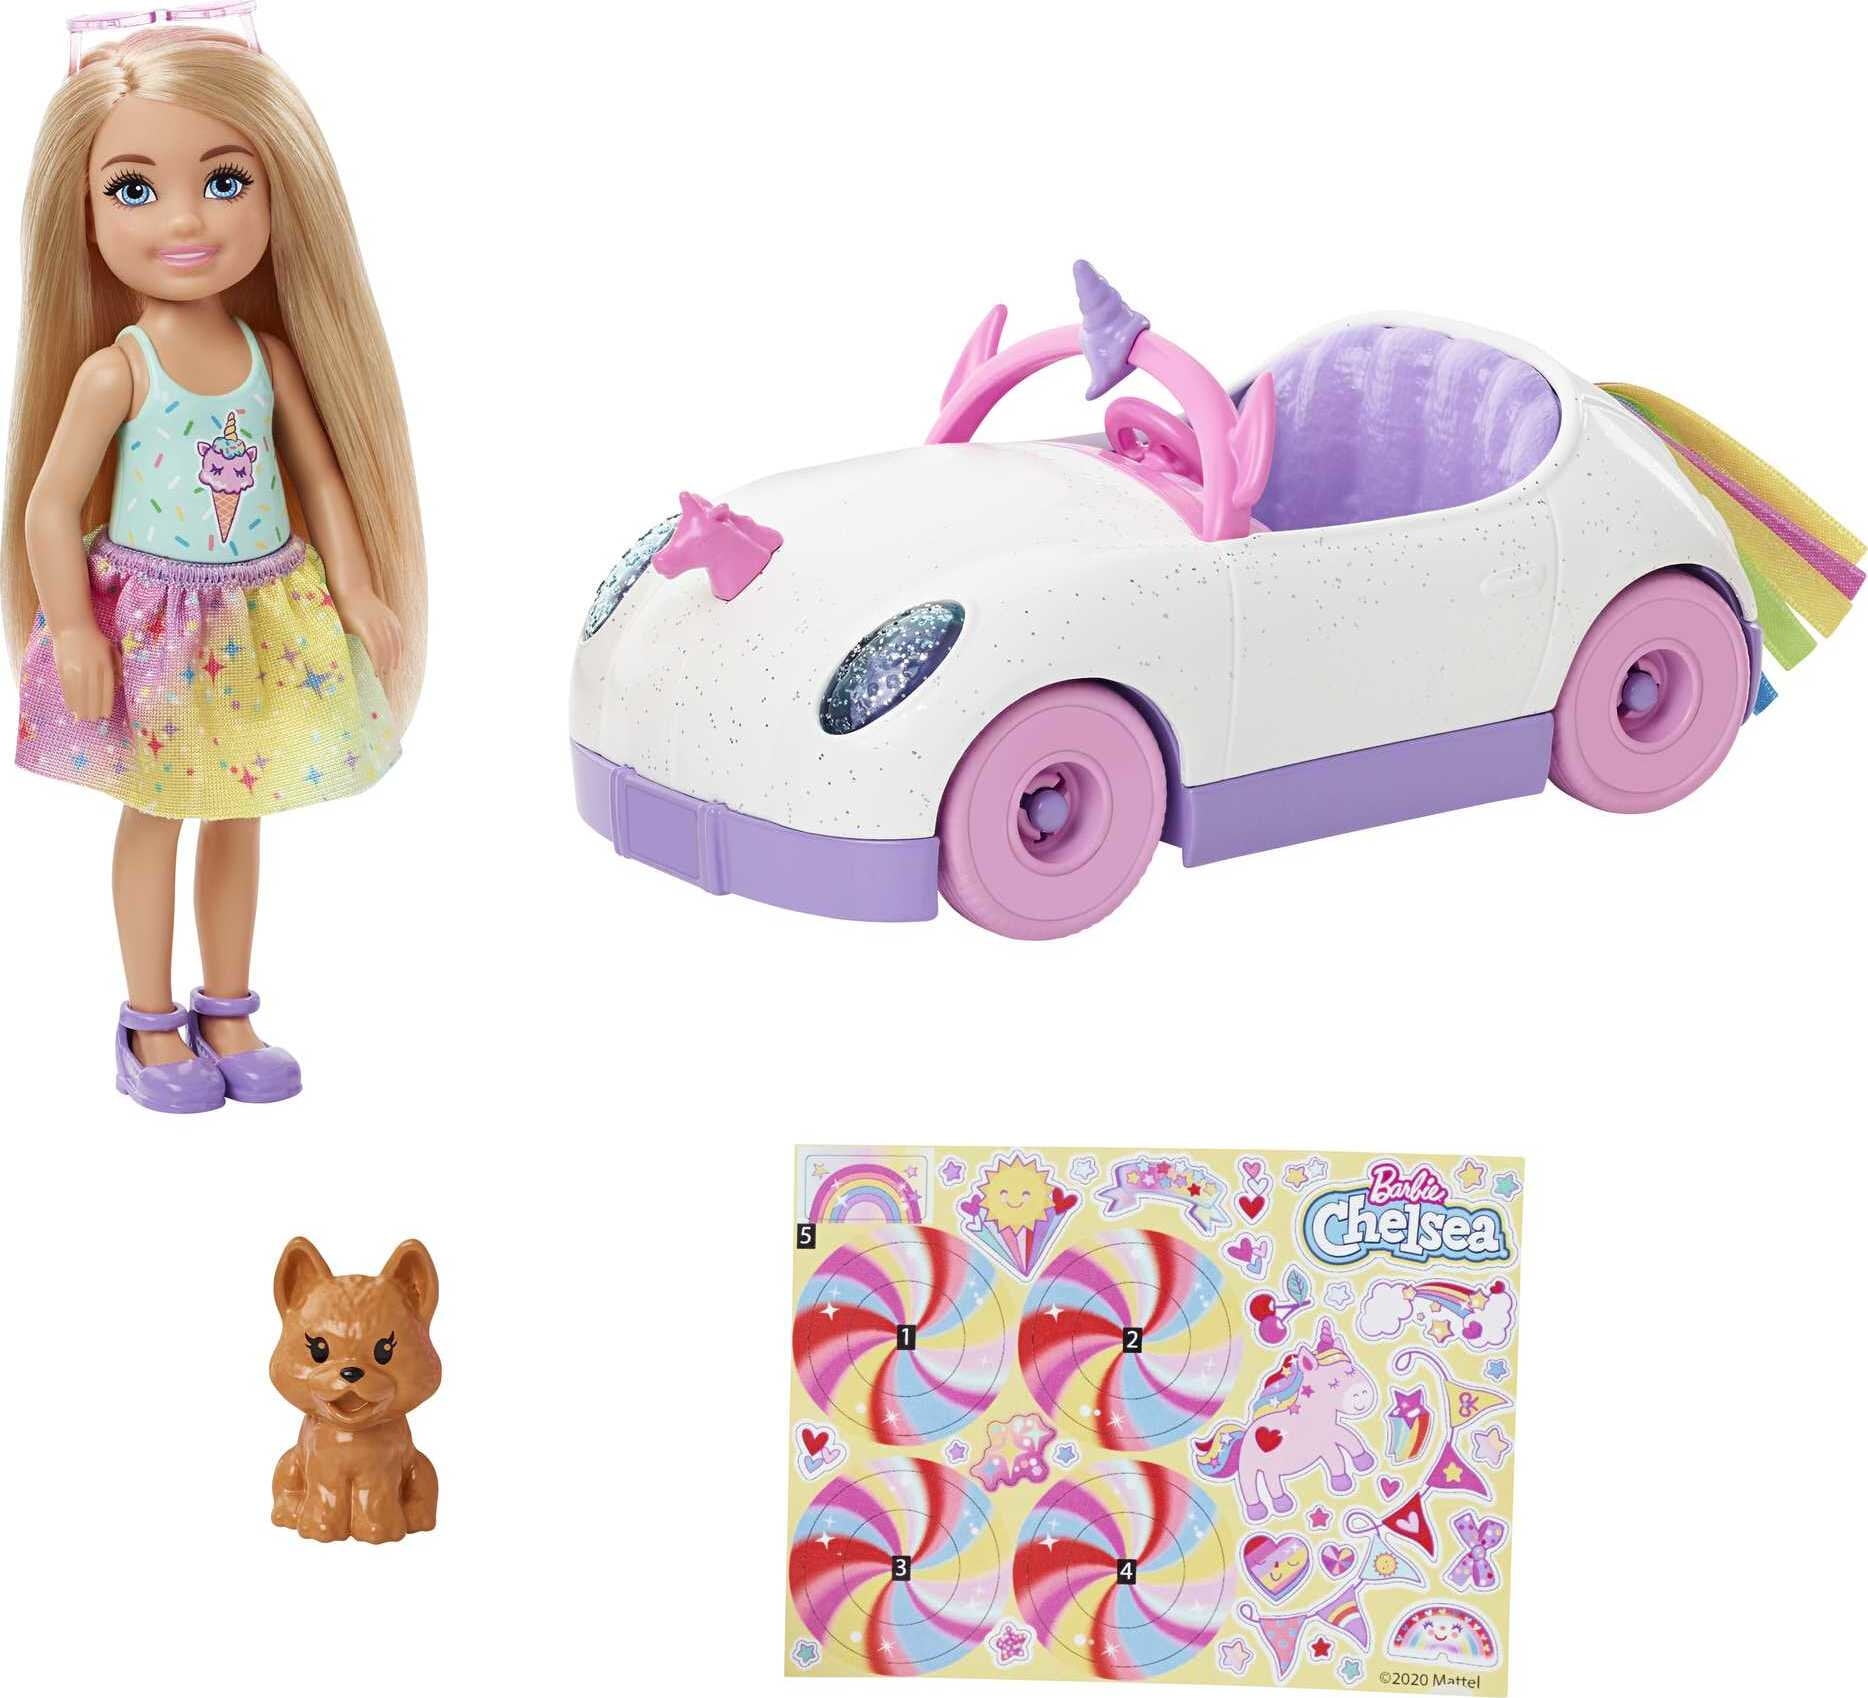 Barbie Club Chelsea Doll & Toy Car, Unicorn Theme, Blonde Small Doll, Puppy, Stickers & Accessories